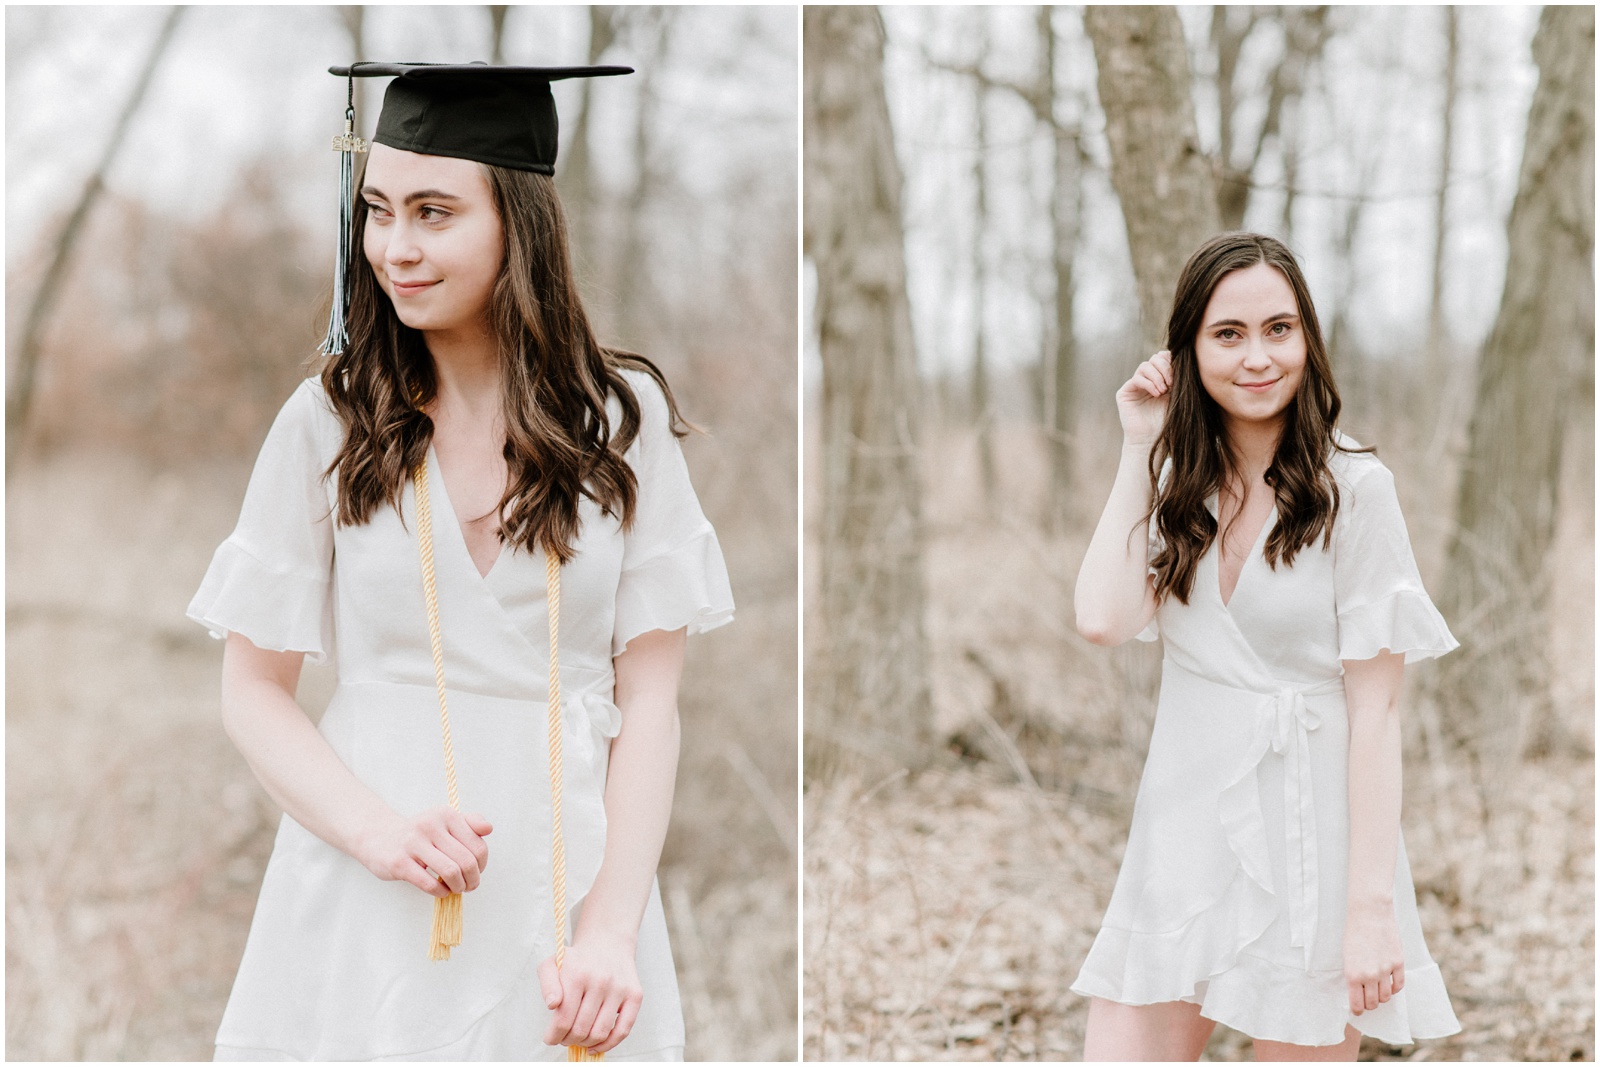 Senior portraits in a forest preserve with a white dress